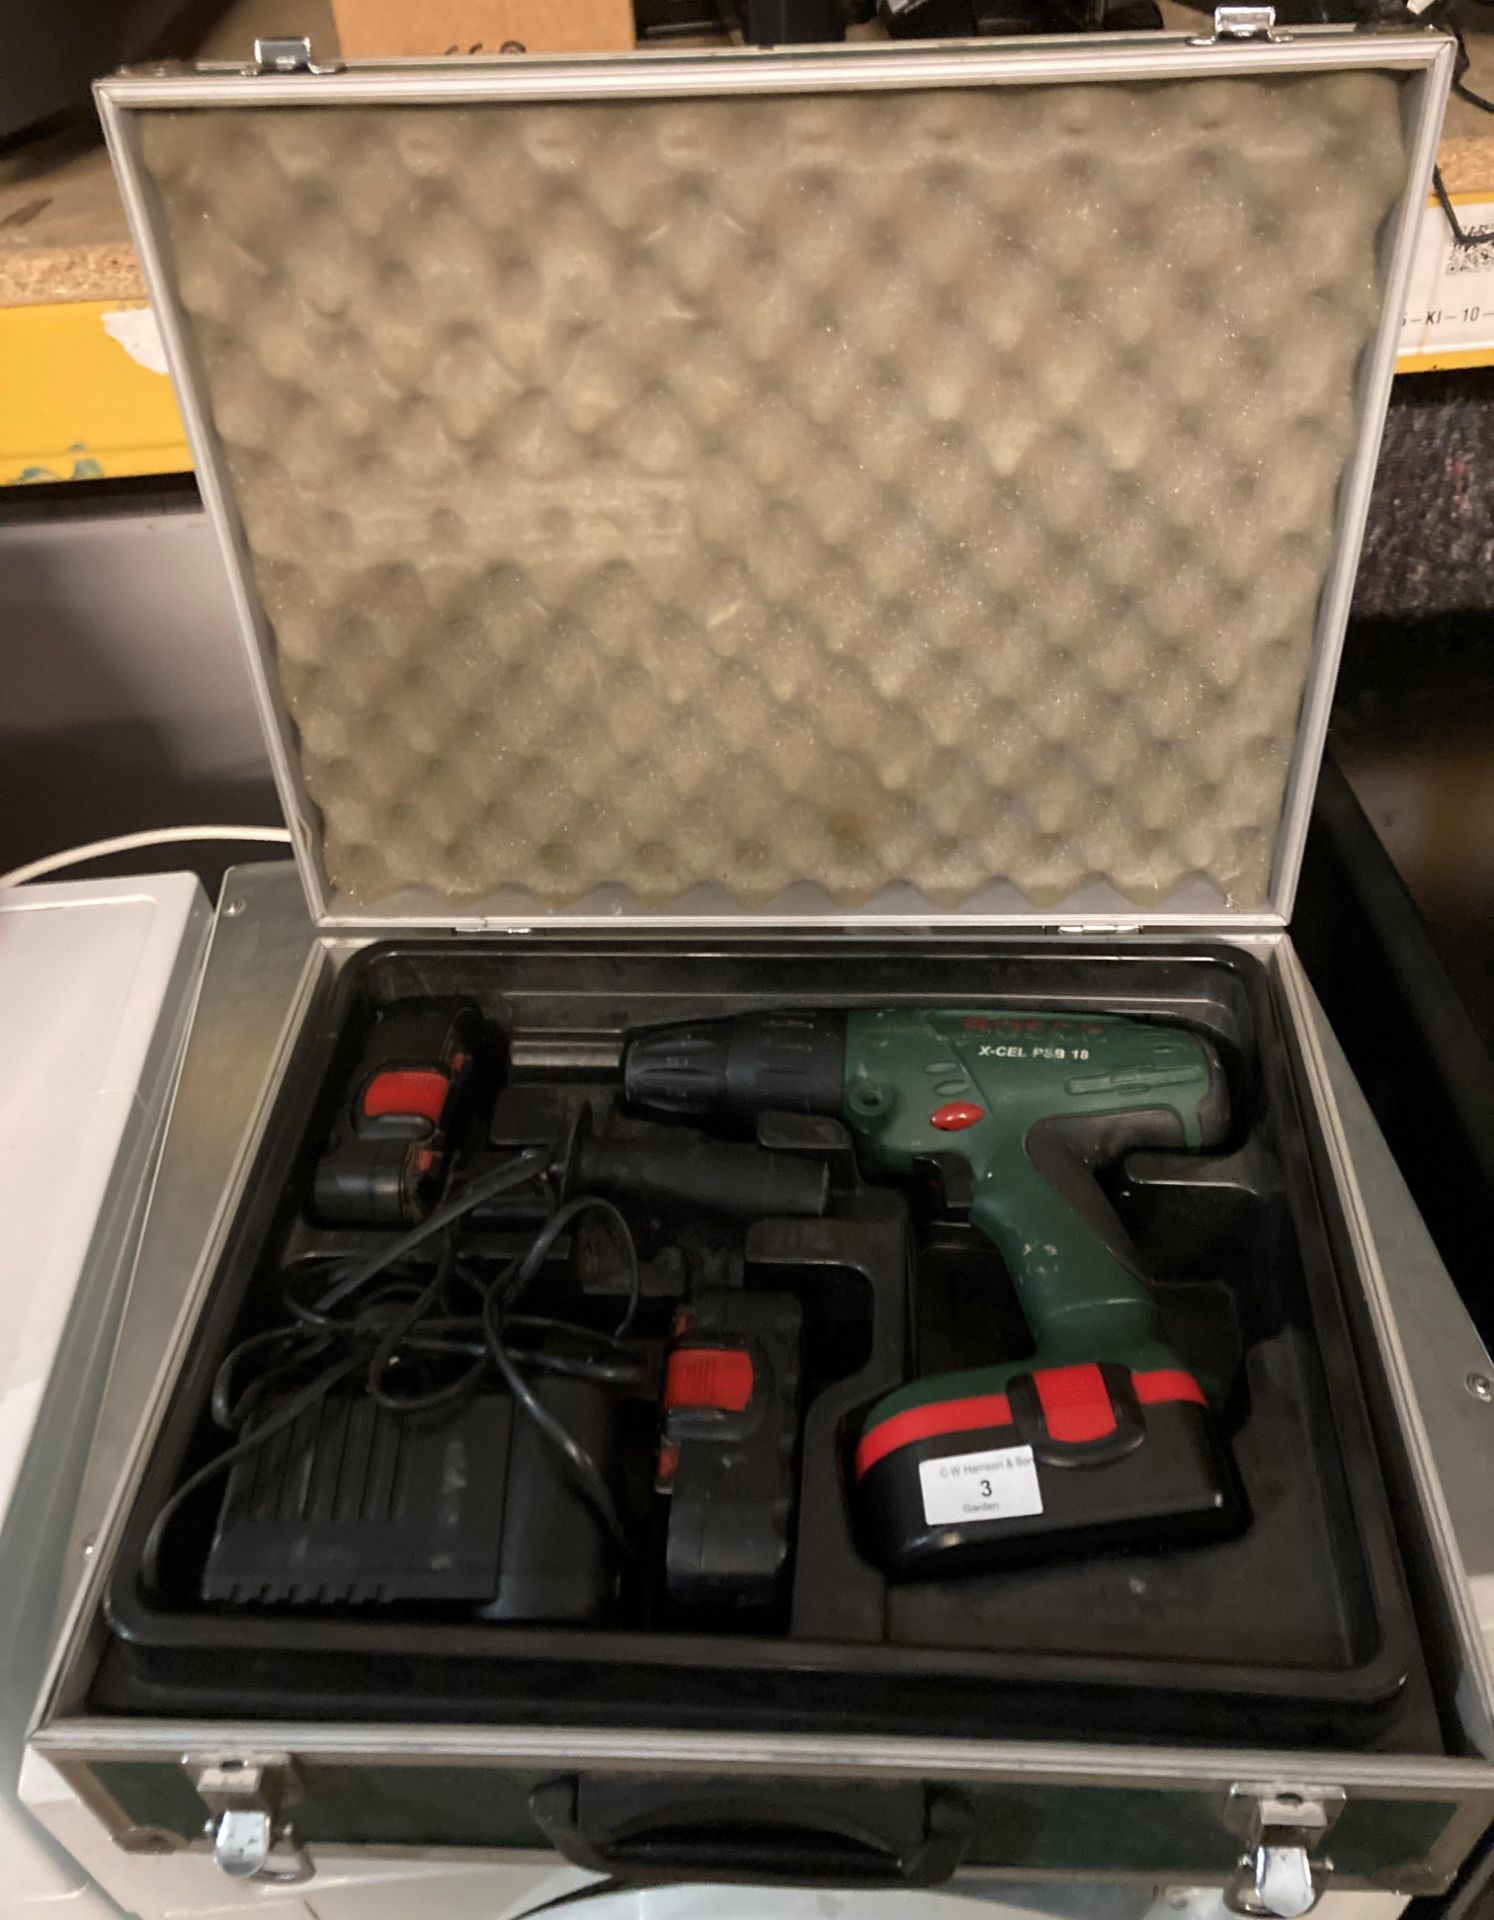 A Bosch X-Cel PSB 18 cordless drill complete with charger and three batteries in carry case